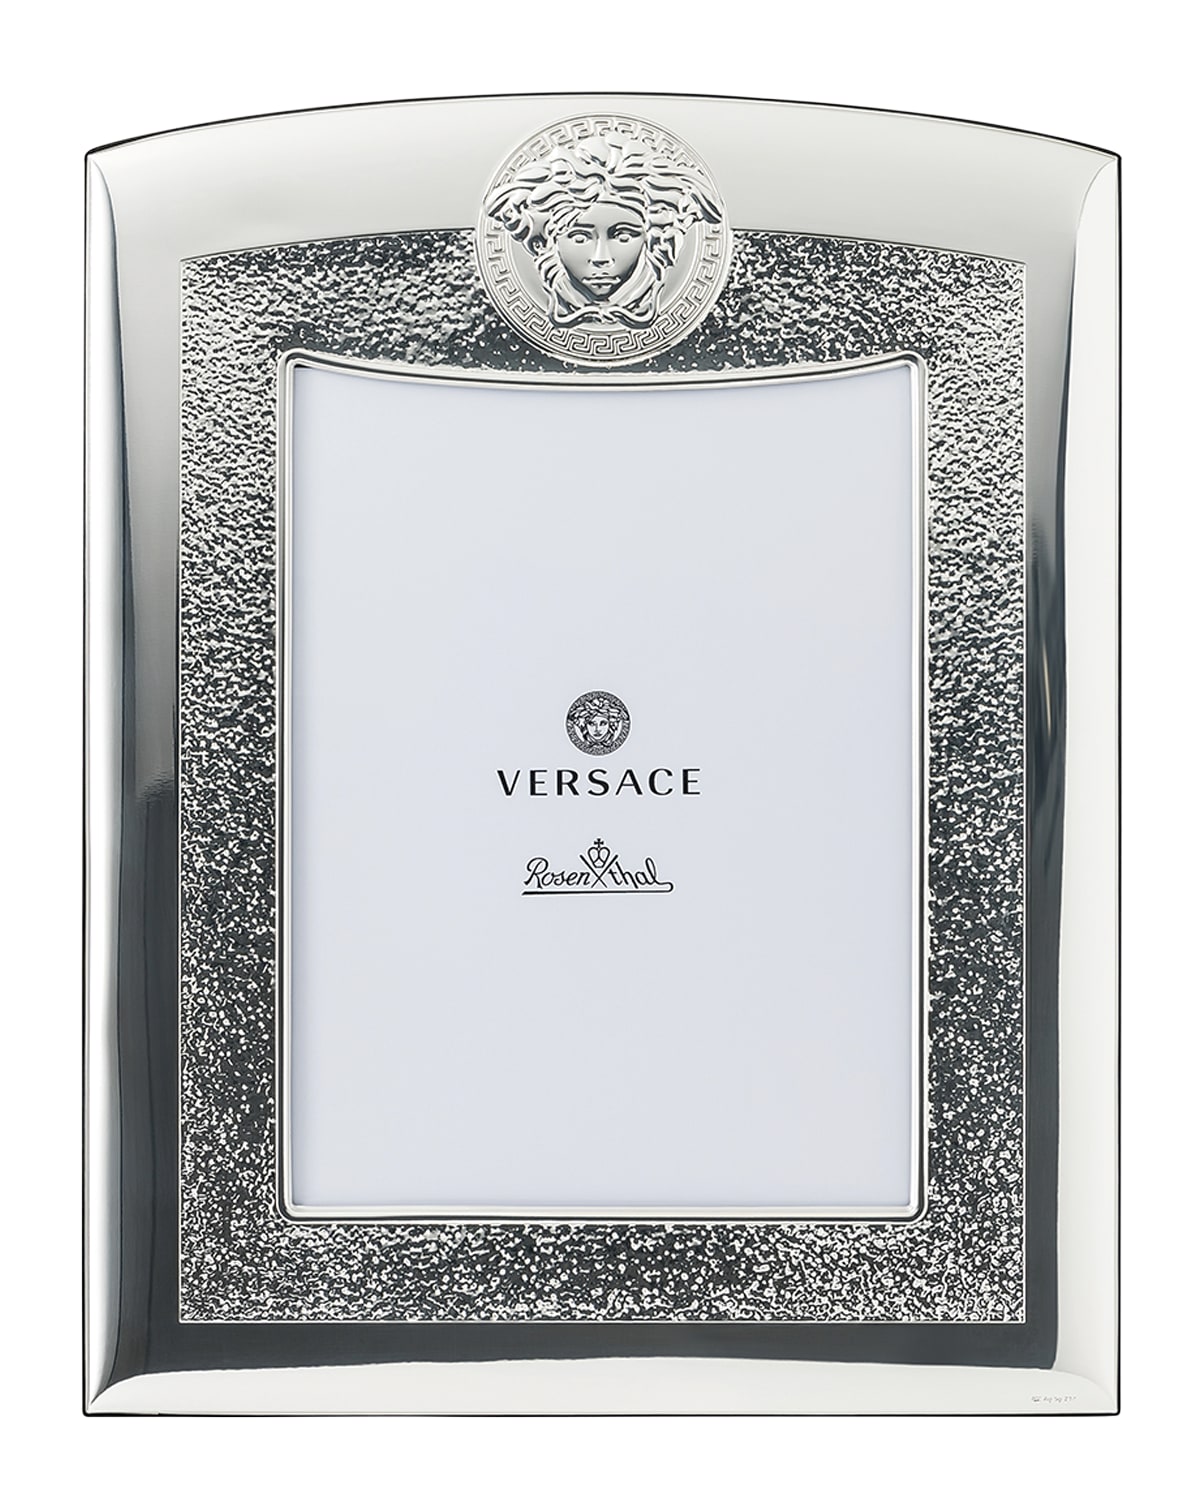 Versace Vhf7 Picture Frame In Silver, 6x8